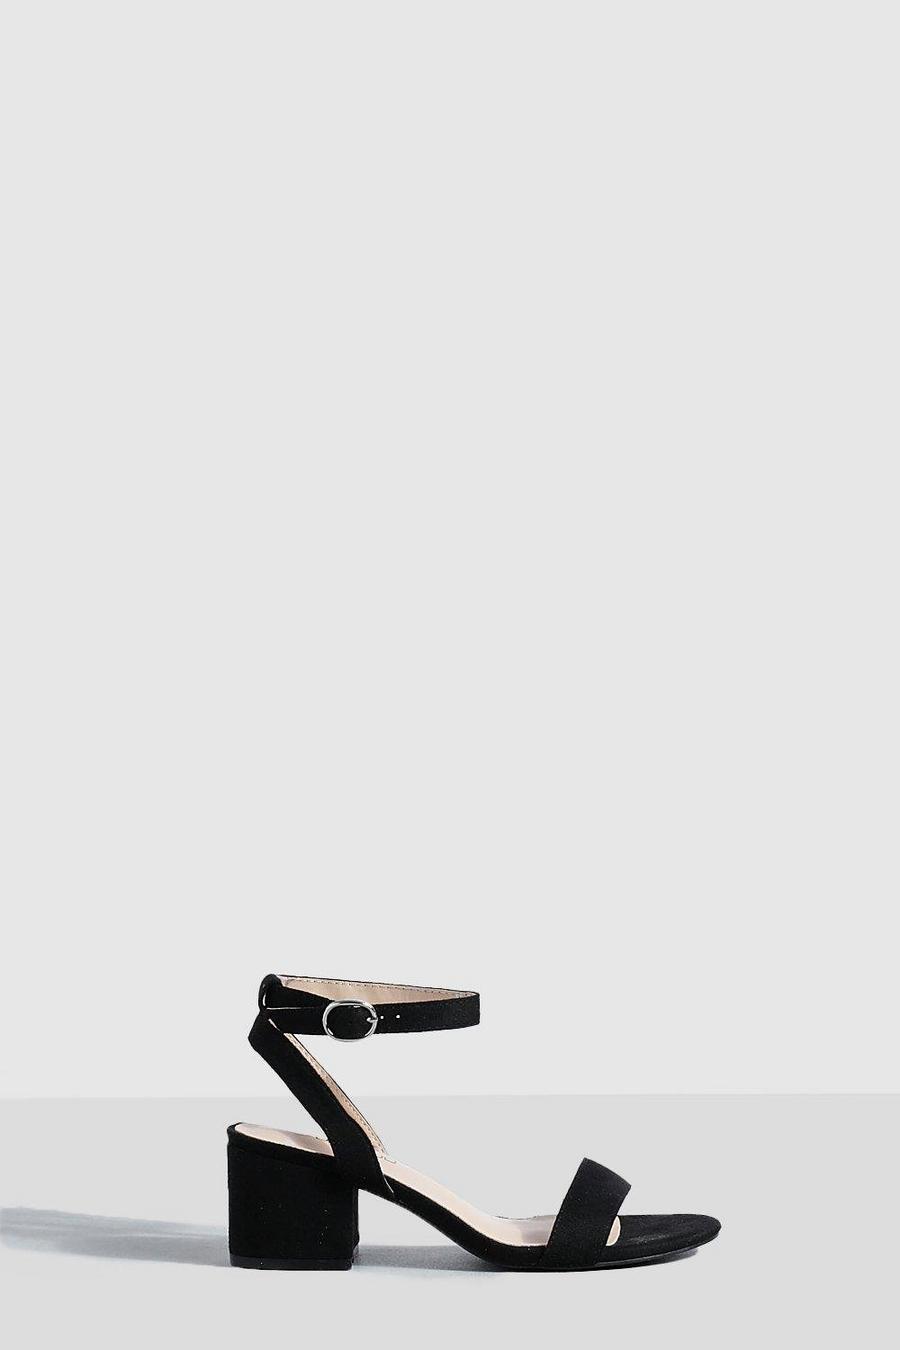 Black negro Low Block Barely There Heels   